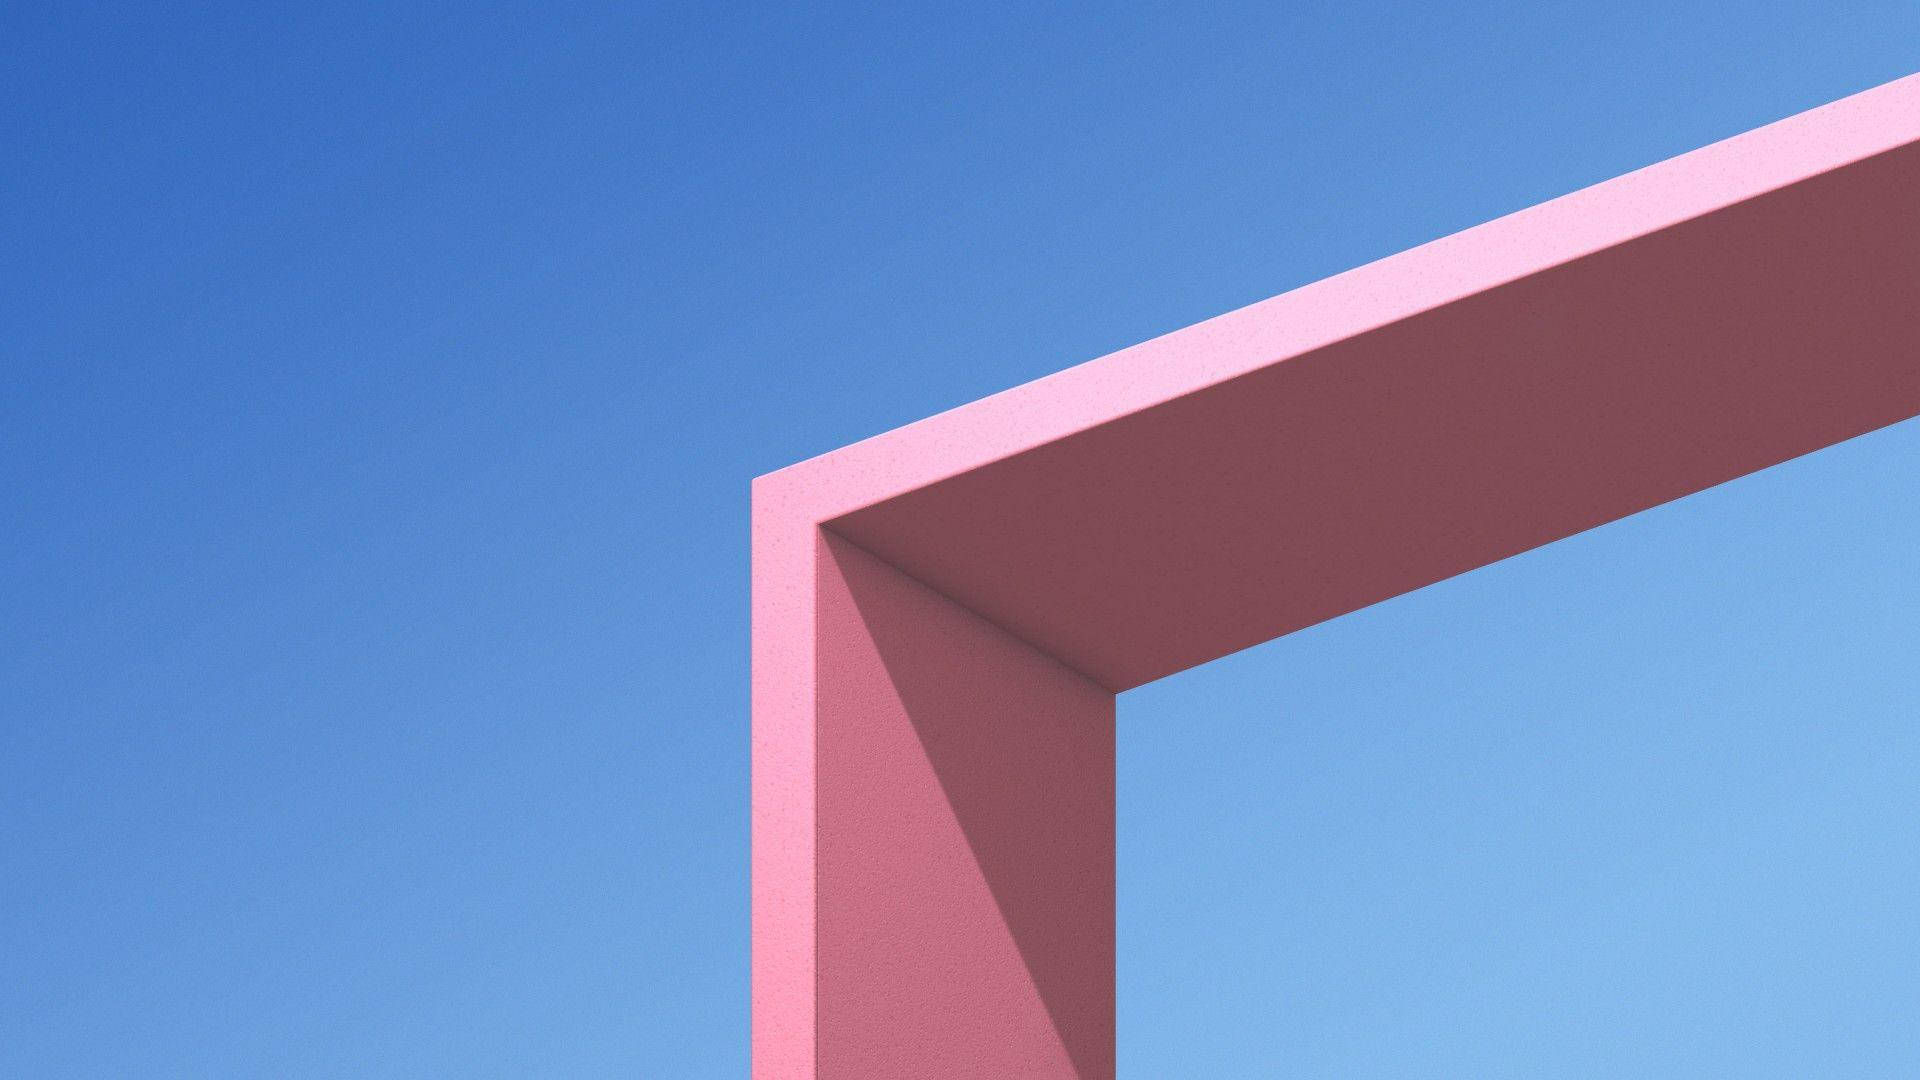 Pink Architecture On Blue Sky Background